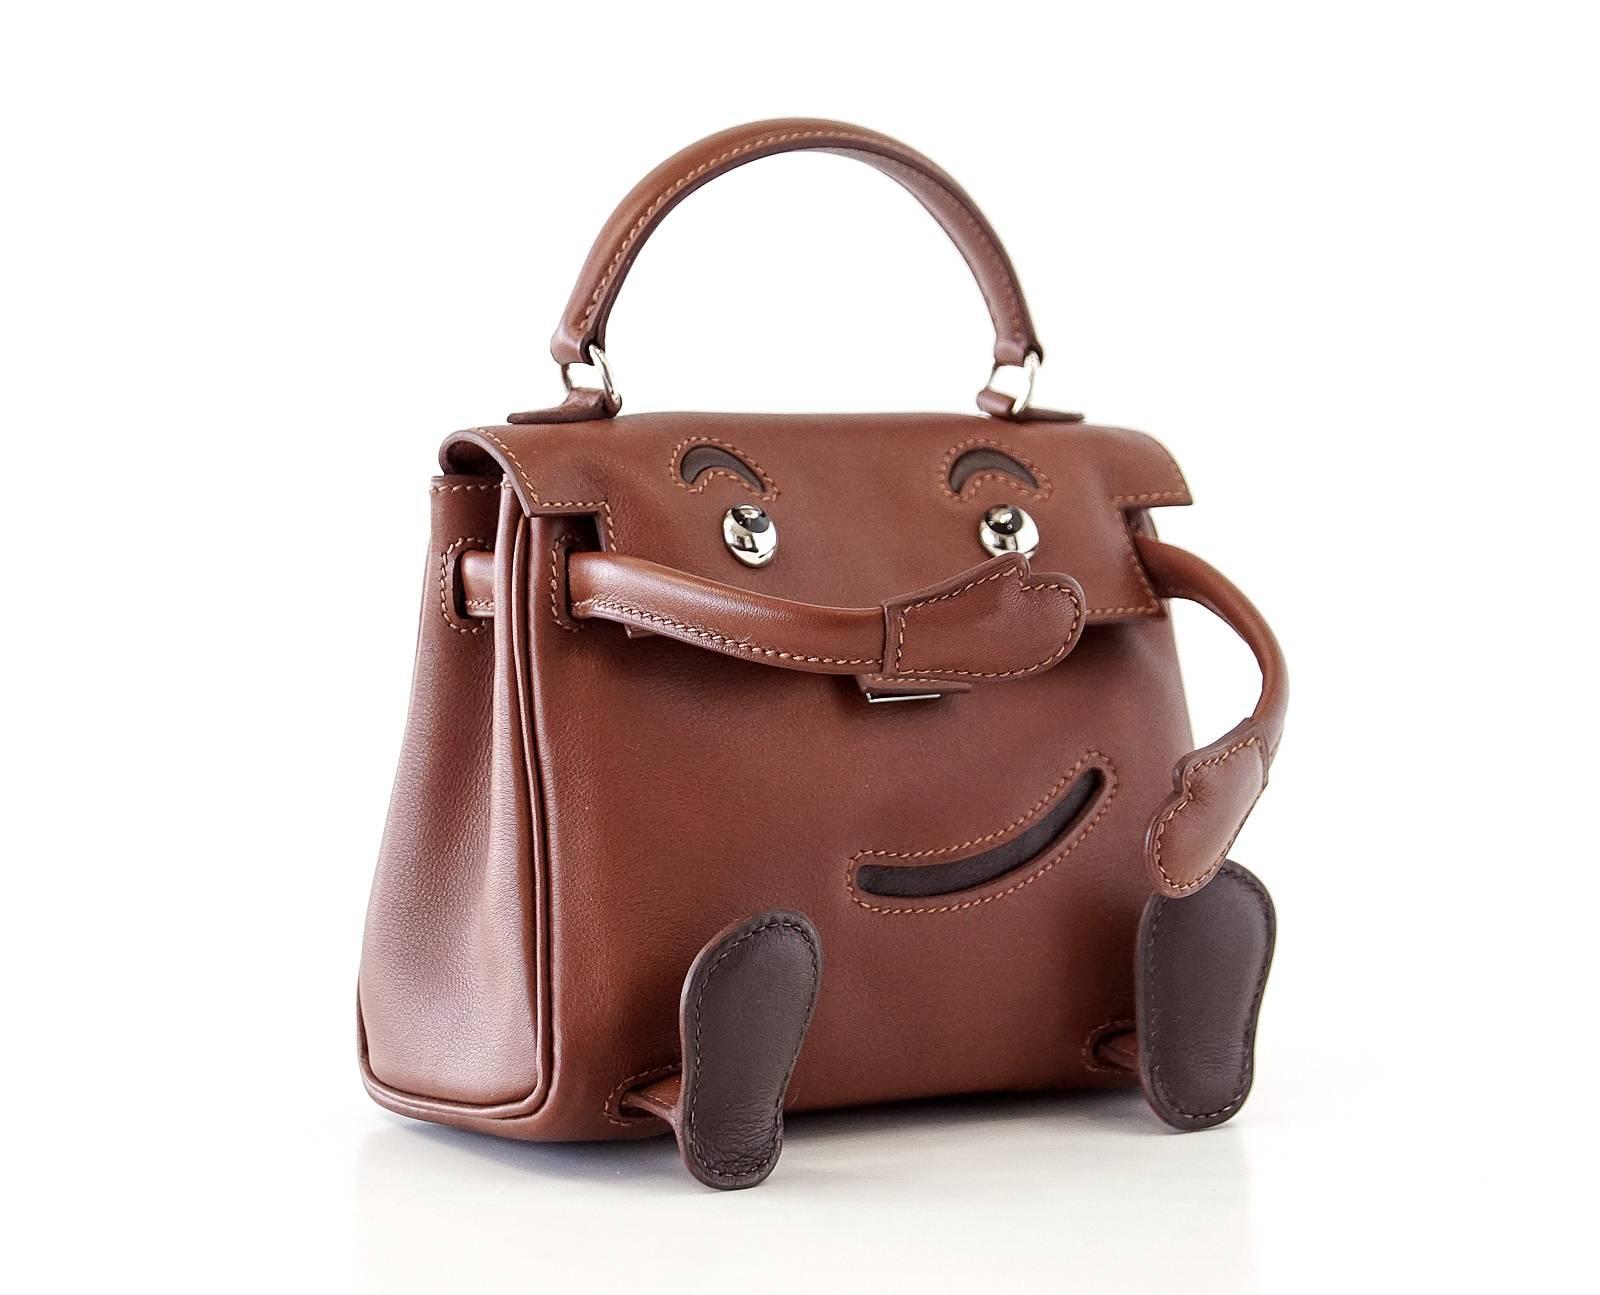 Guaranteed authentic whimsical Hermes Limited Edition Noisette Quelle Idole Kelly Doll in Gulliver leather.
This charming little bag with appliquéd features and movable appendages was crafted as part of Hermes' millennium celebration.
Classic Kelly